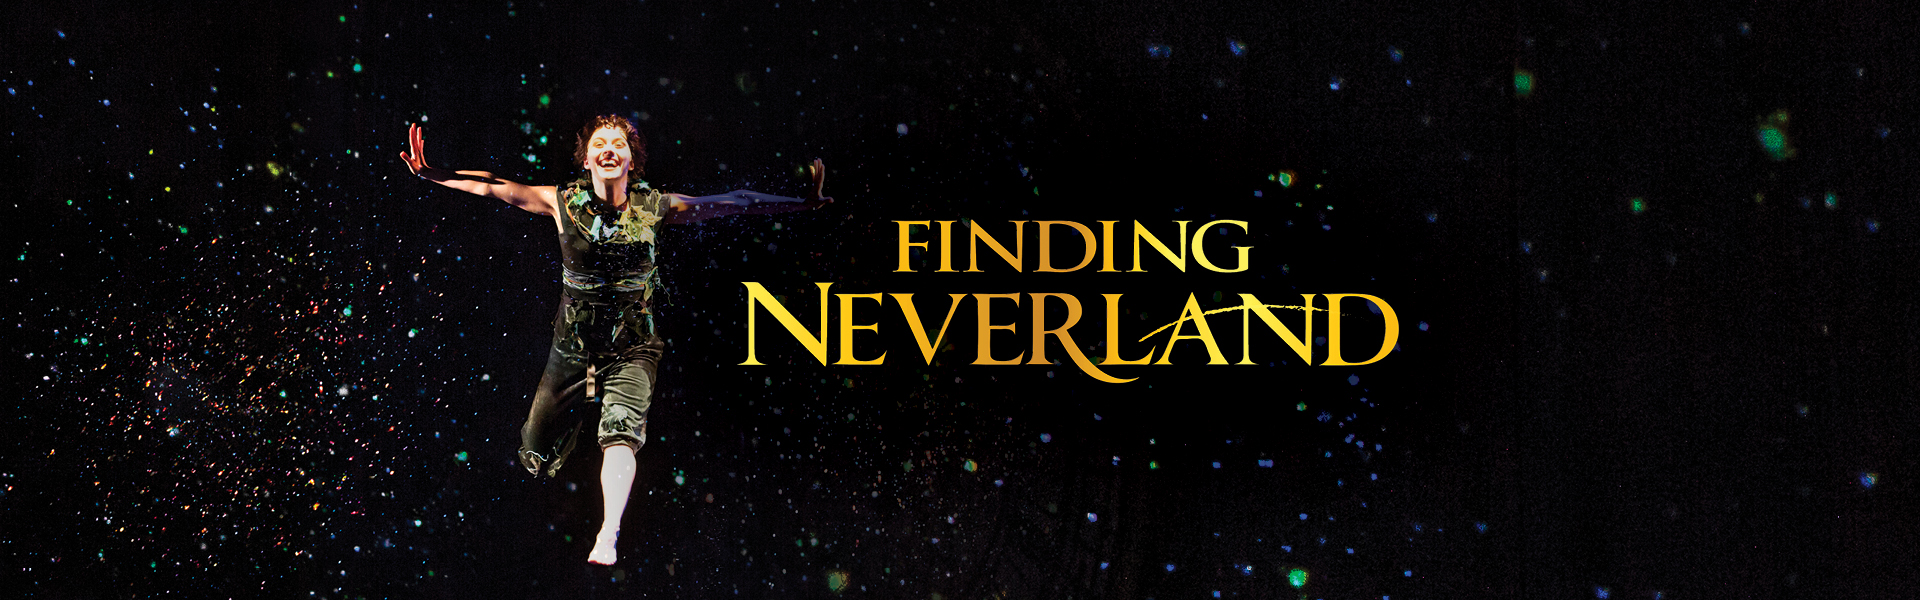 Picture of Finding Neverland performance